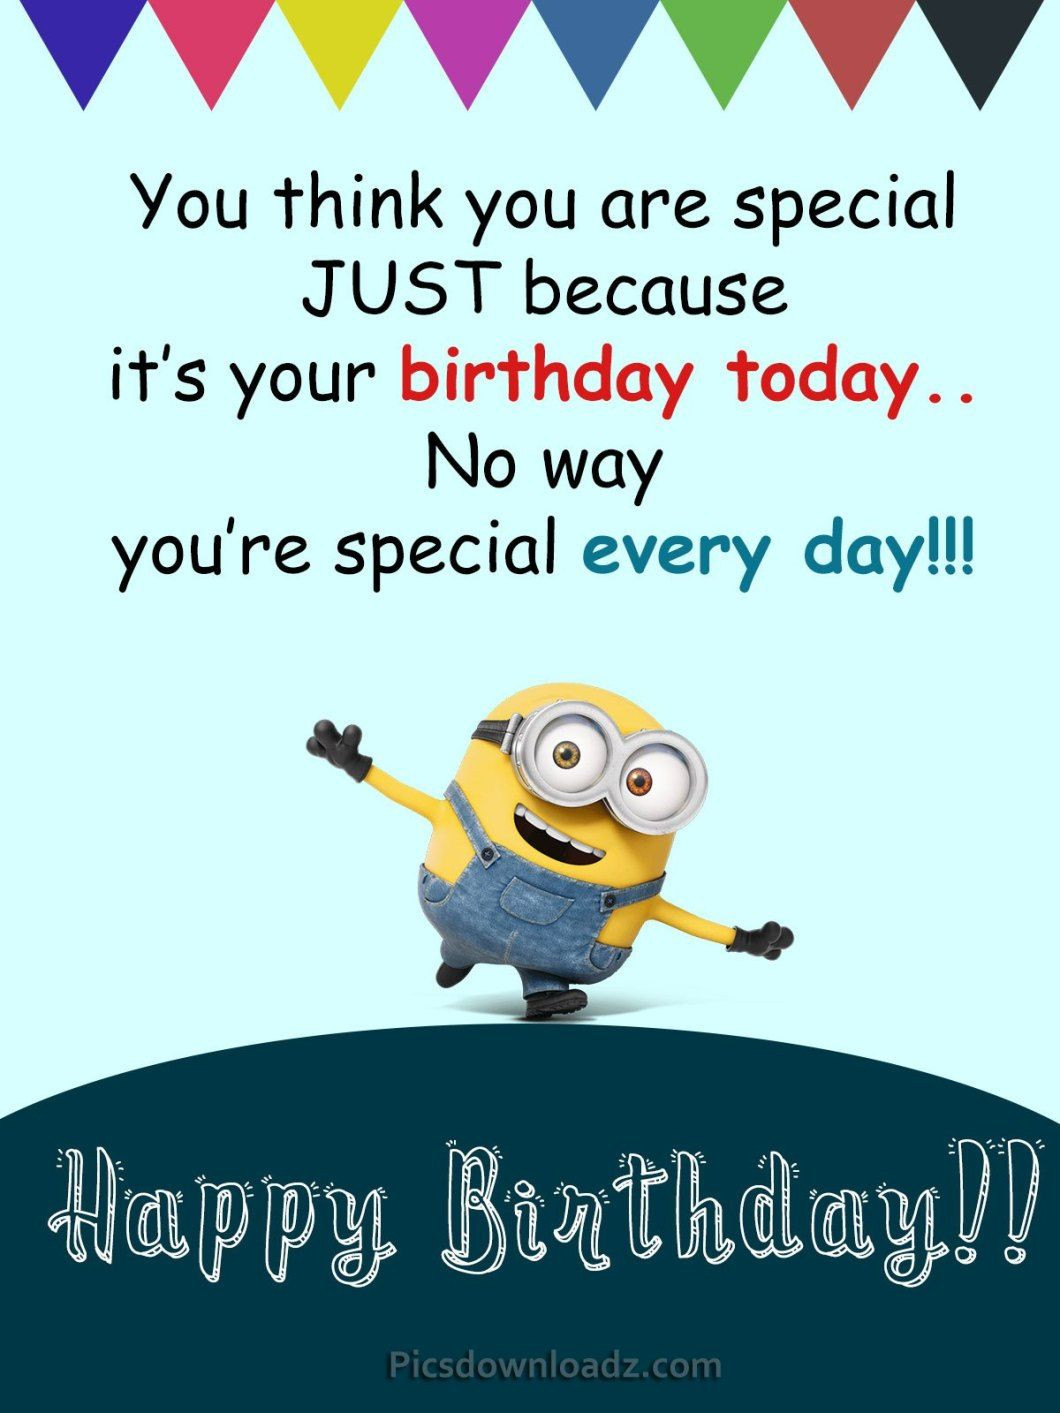 Happy Birthday Best Friend Quotes Funny
 Funny Happy Birthday Wishes for Best Friend – Happy